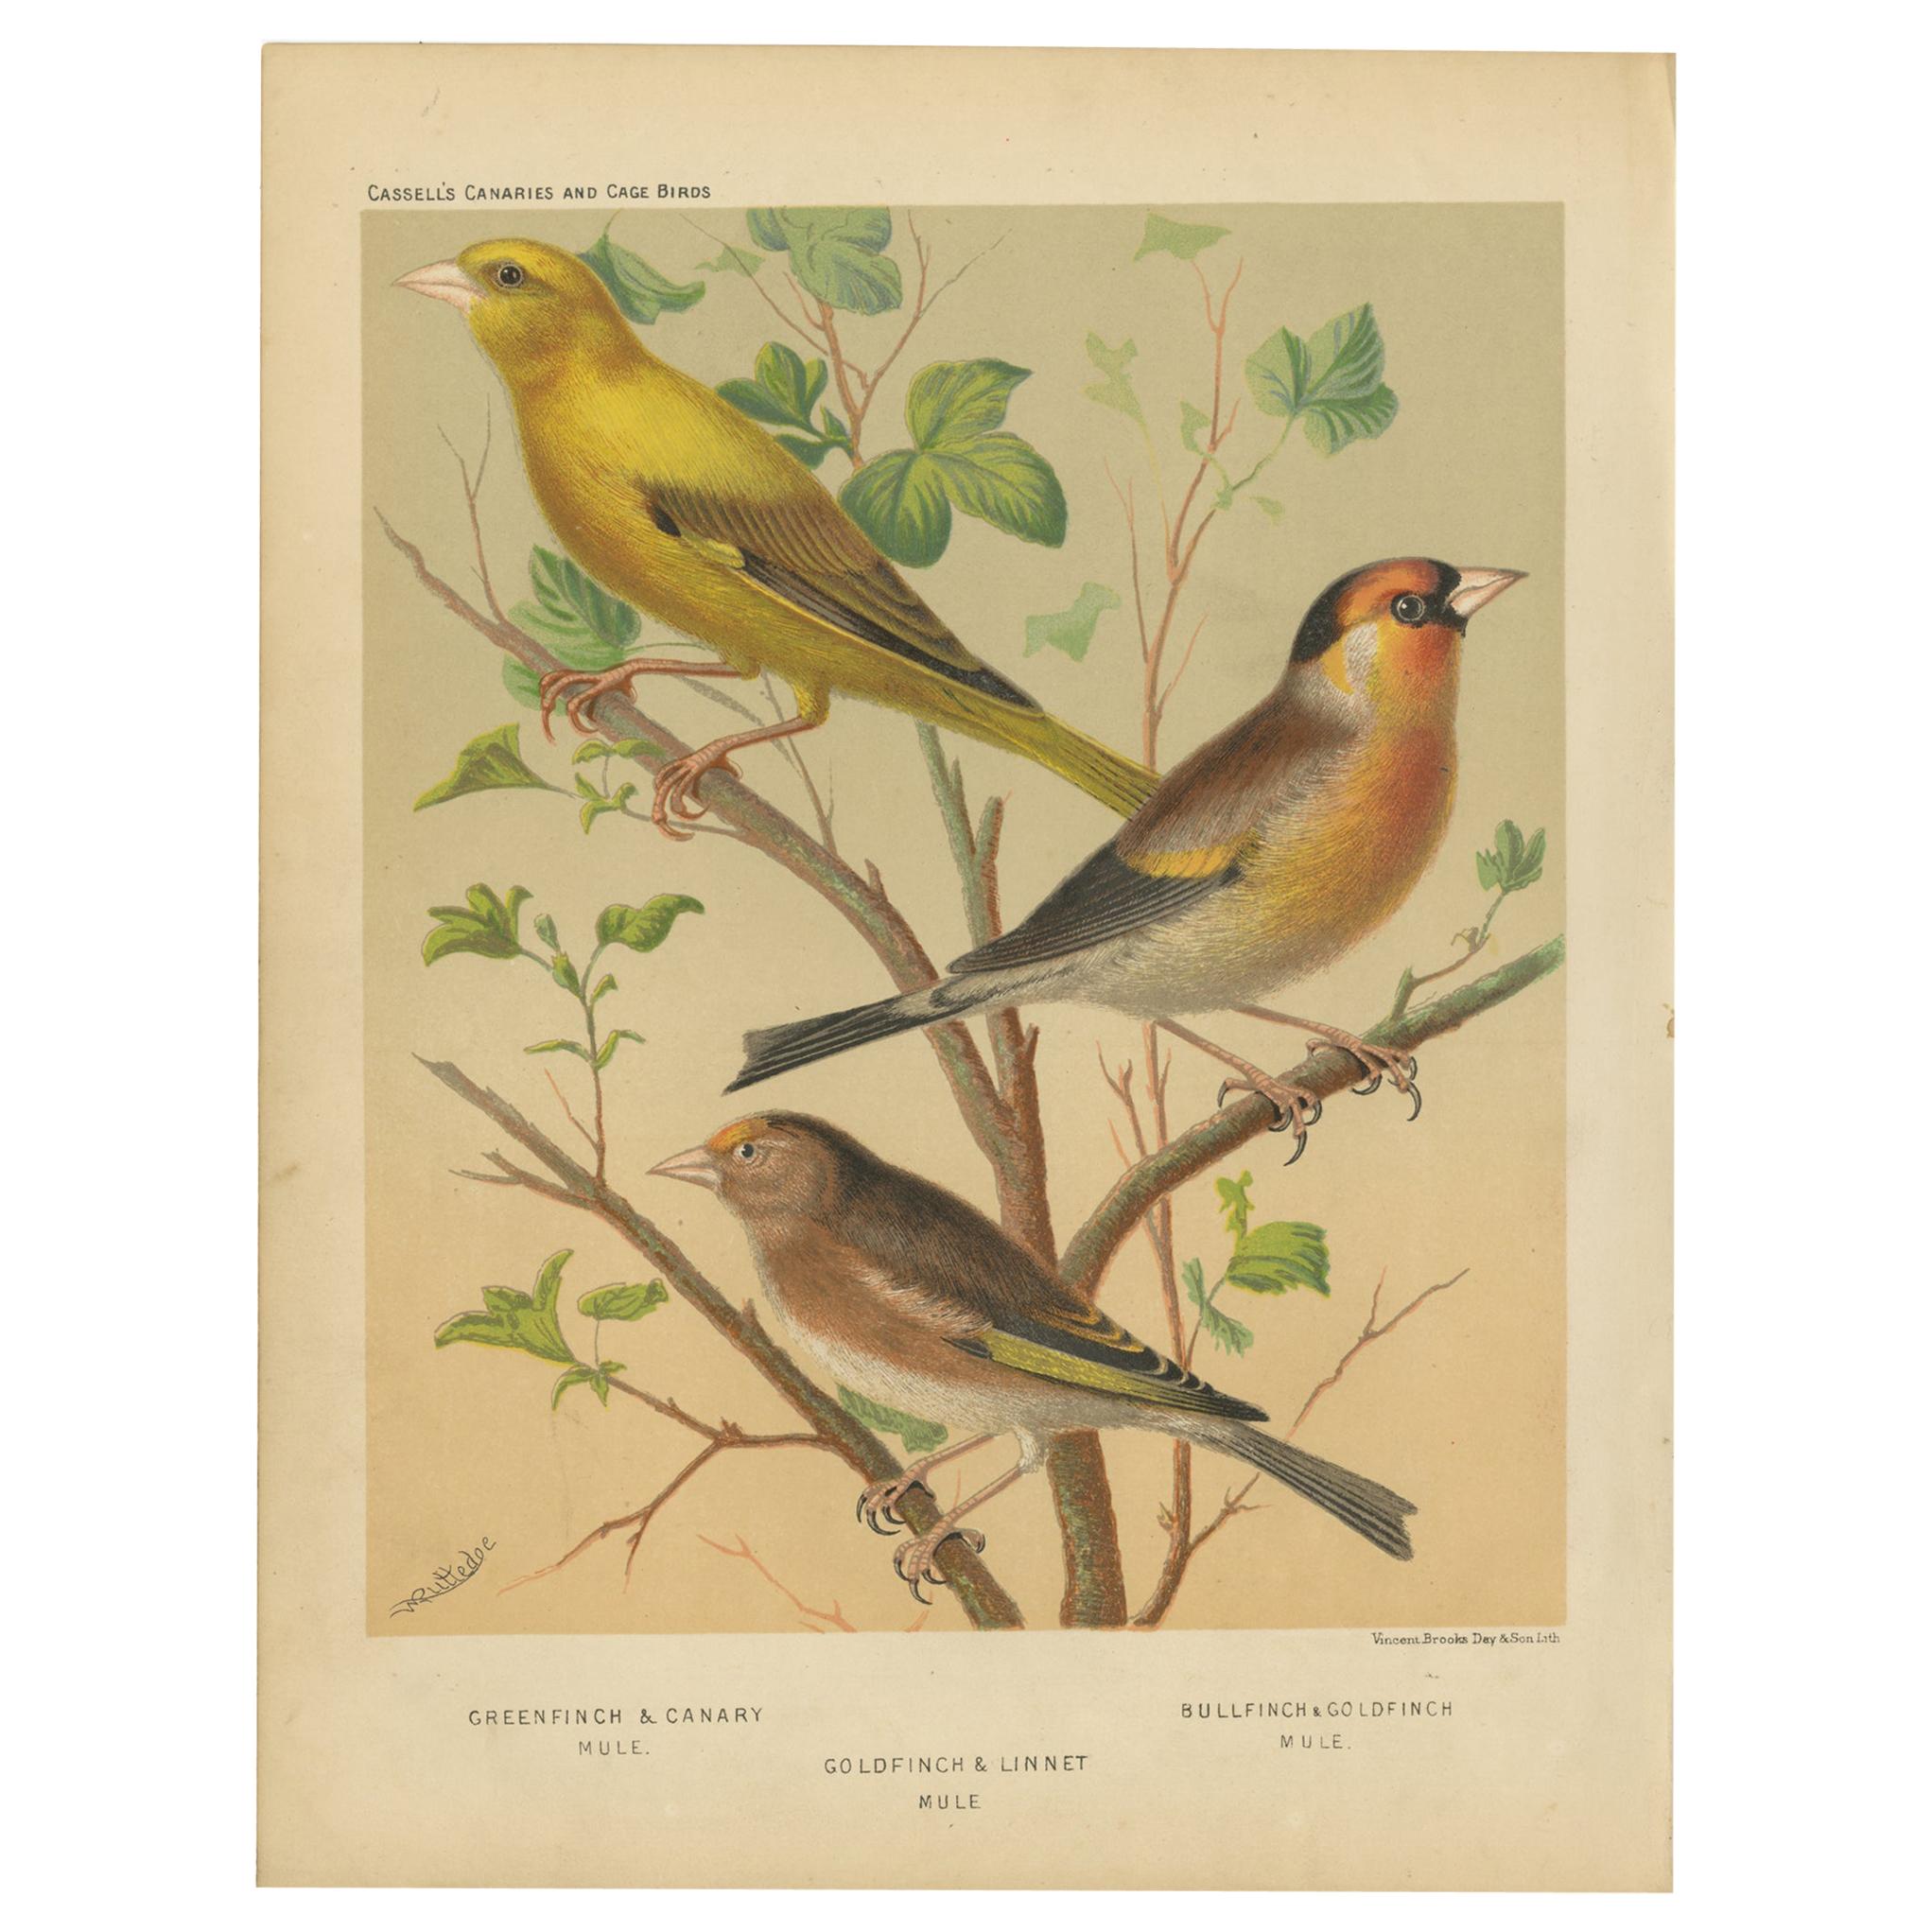 Antique Bird Print of Greenfinch & Canary Mule, Goldfinch & Linnet and Others